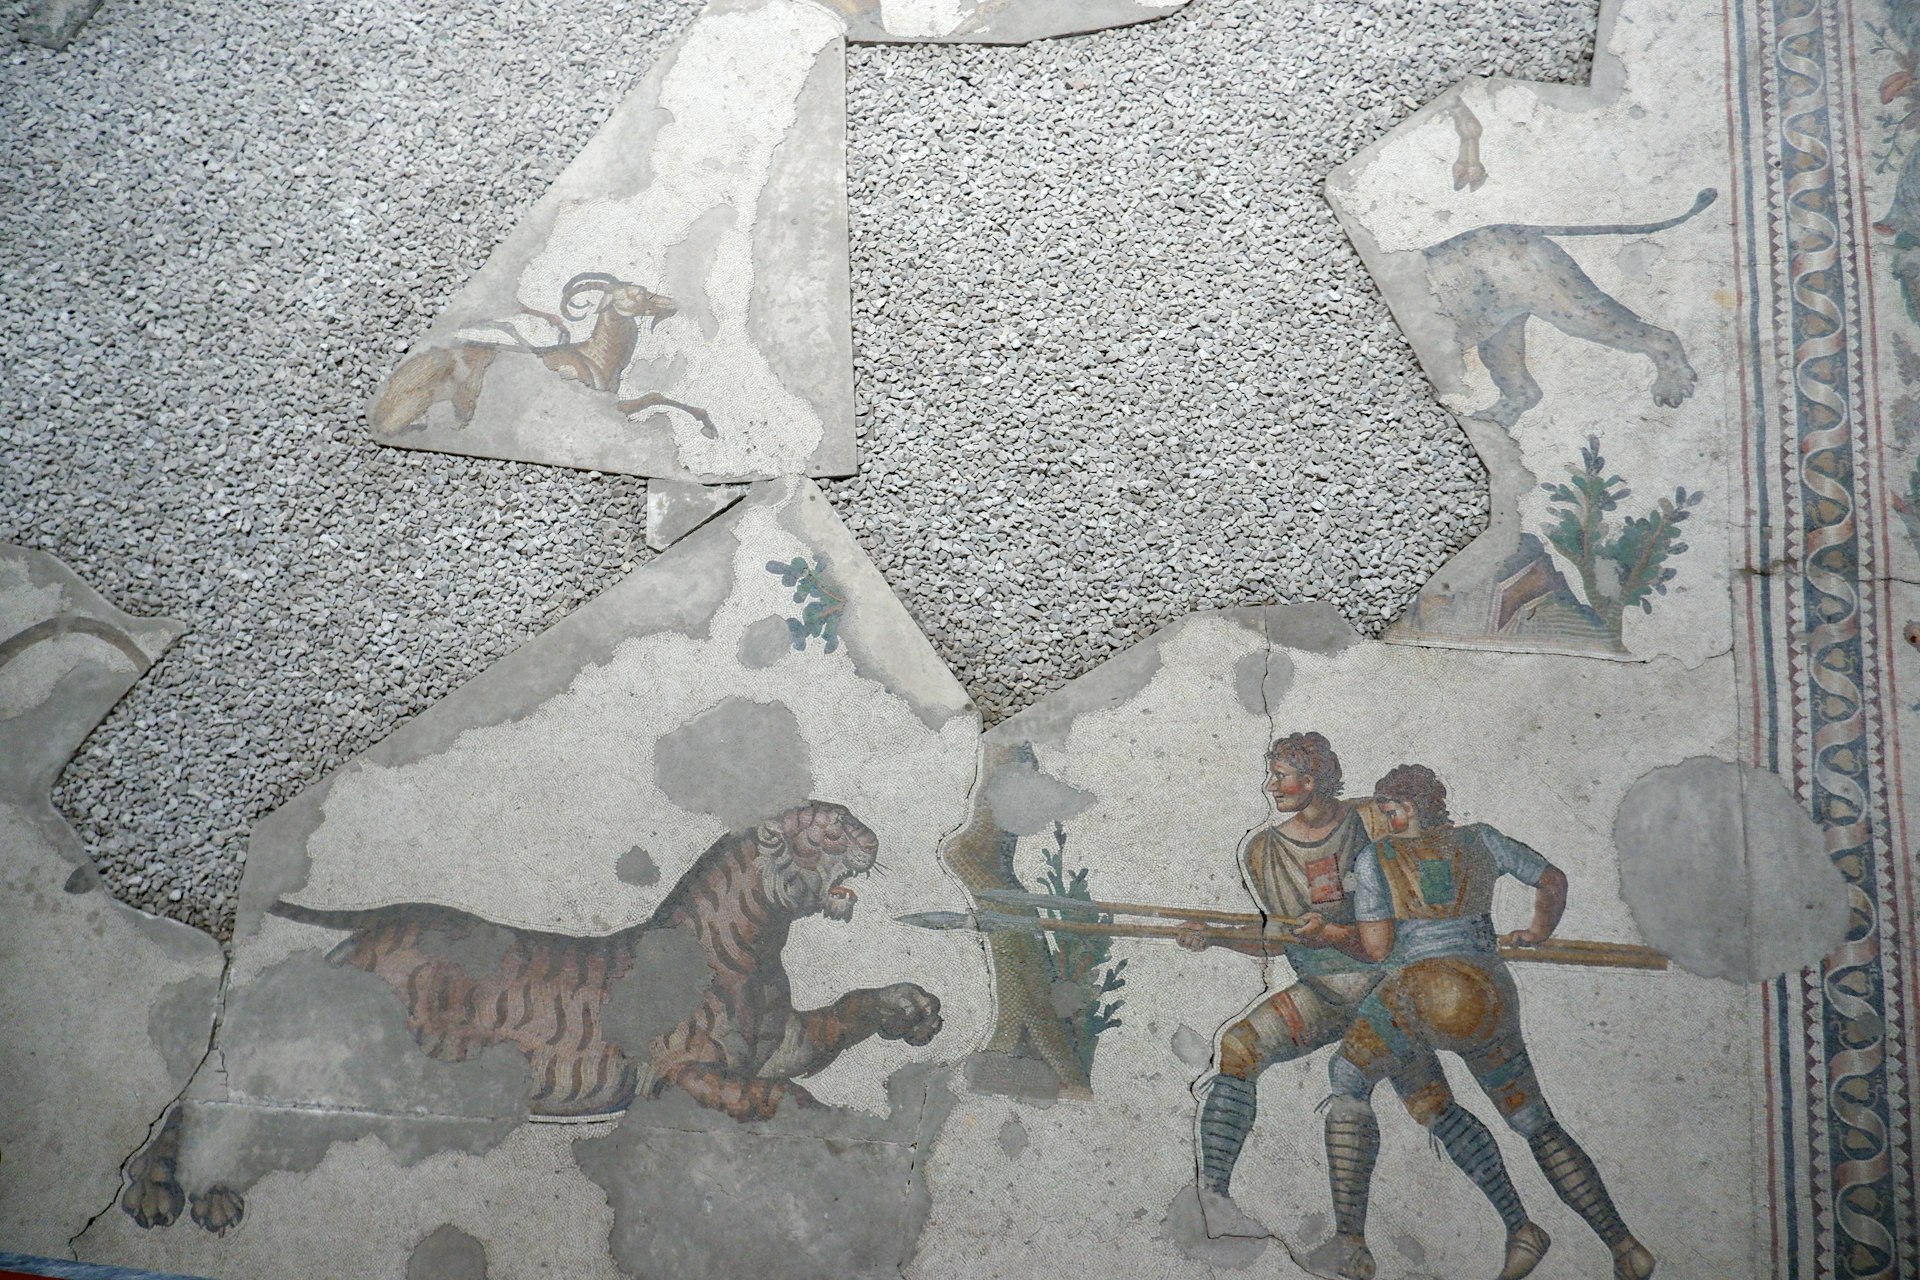 A portion of a mosaic depicting men with spears pointed toward an animal